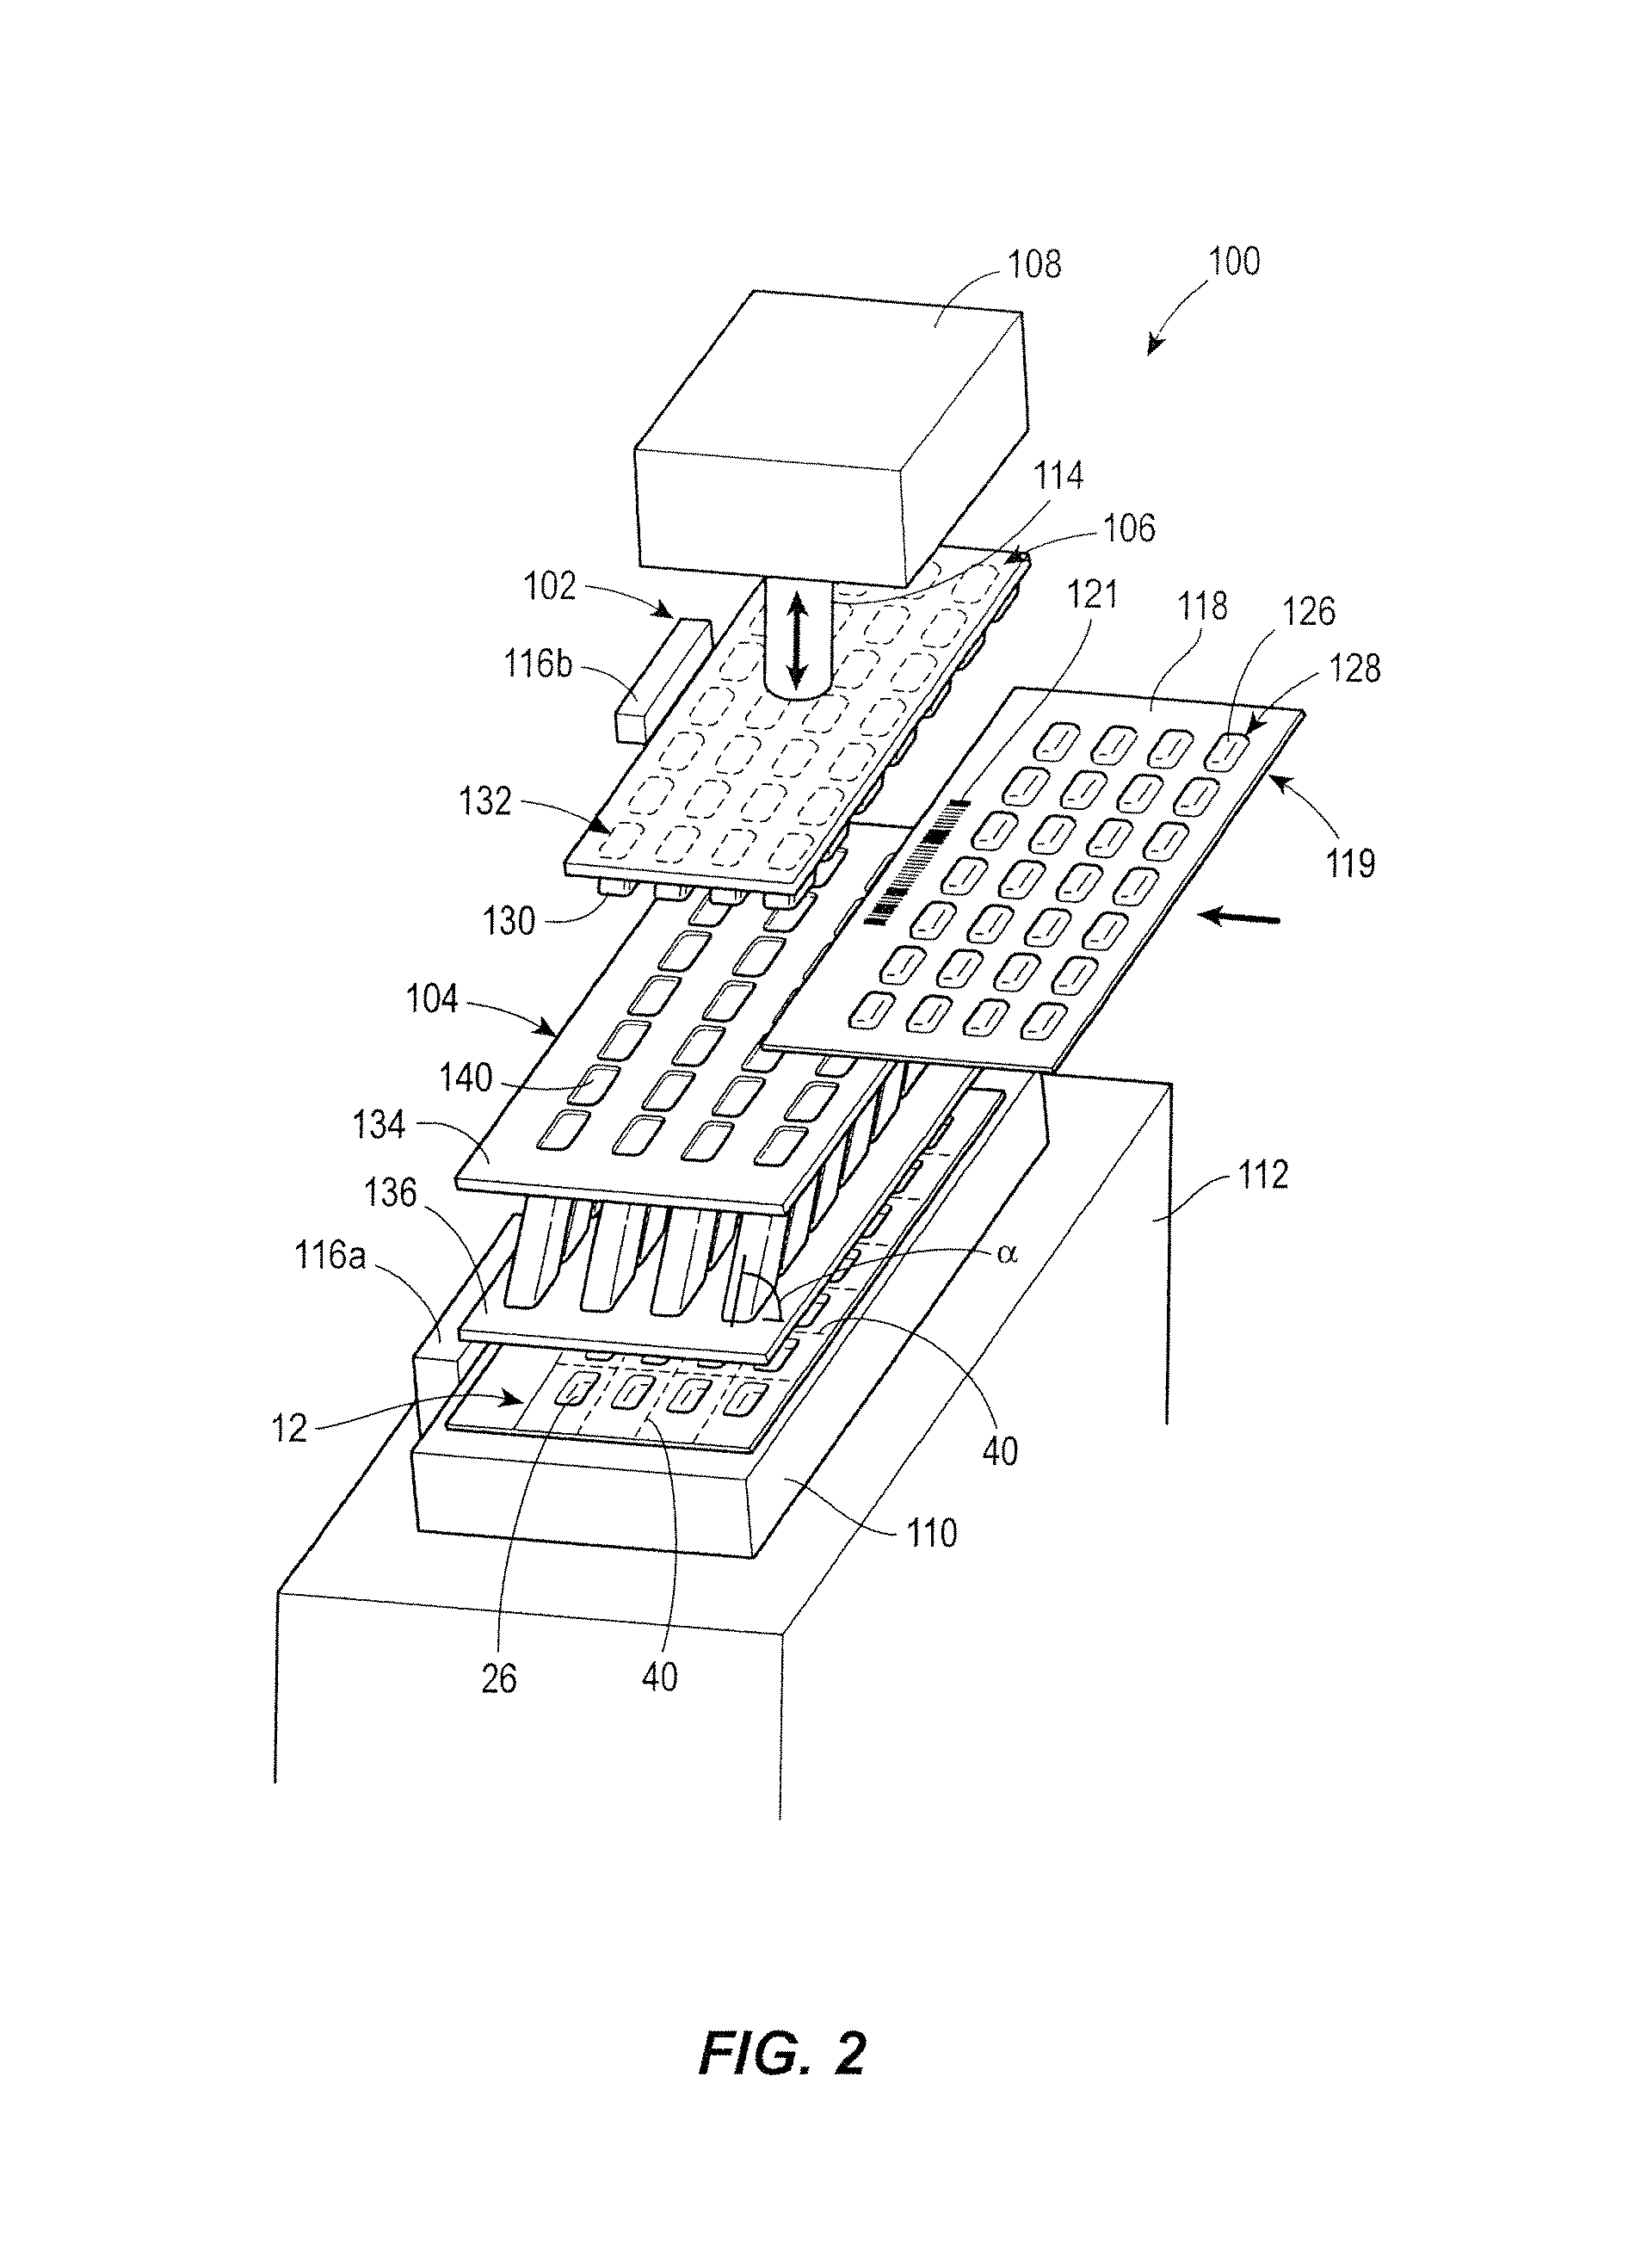 Method and system for verification of contents of a multi-cell, multi-product blister pack